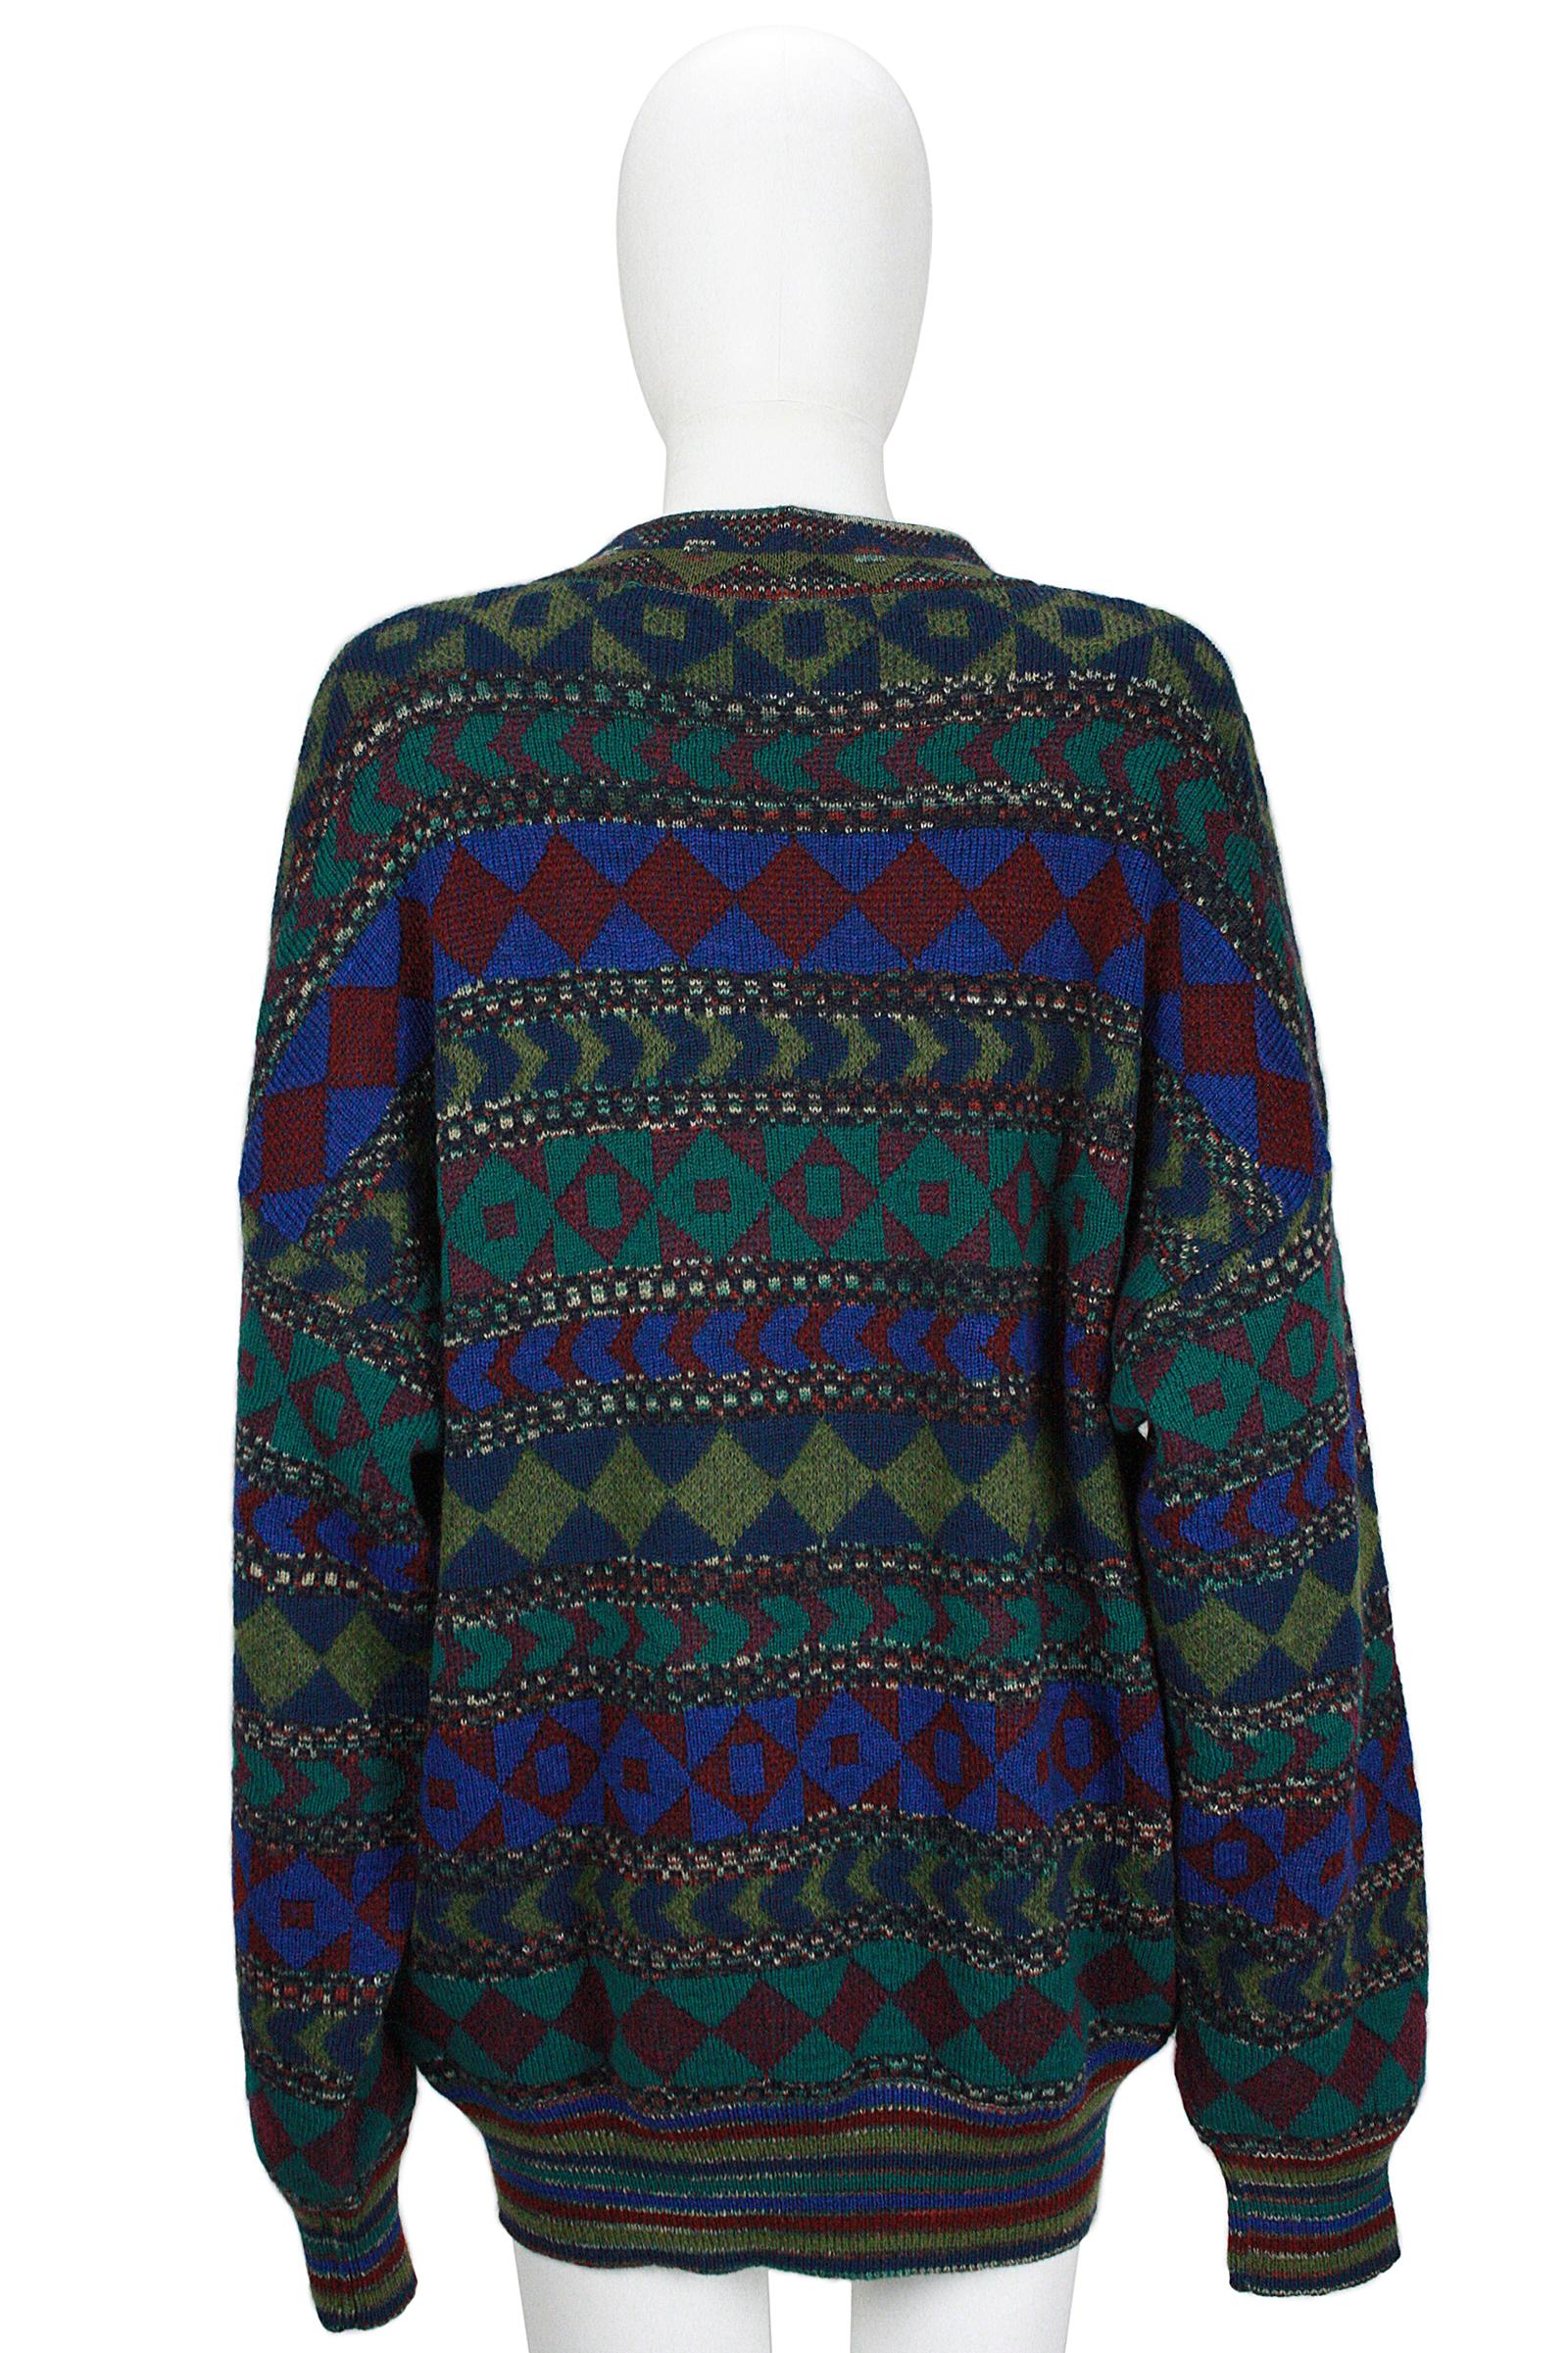 Missoni Multicolor Abstract Sweater In Excellent Condition For Sale In Los Angeles, CA